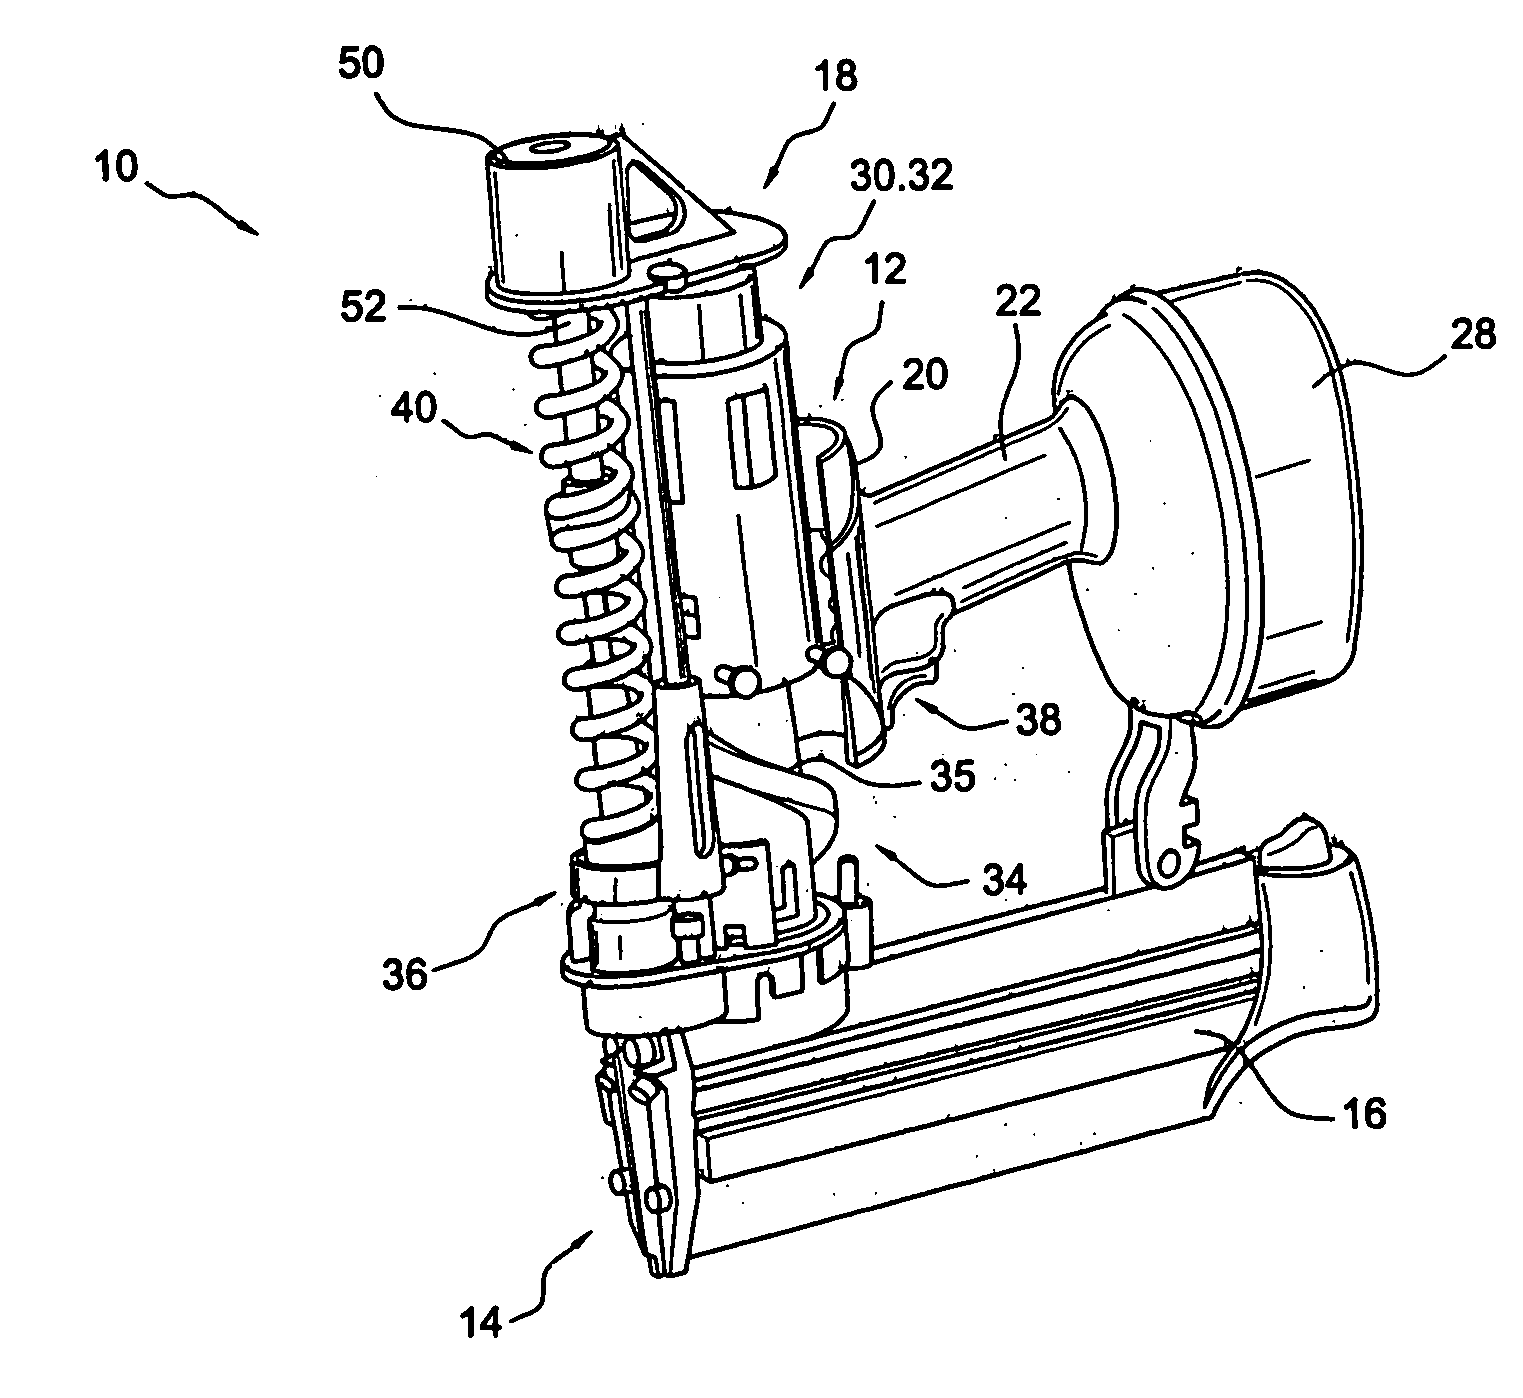 Fastener driving device